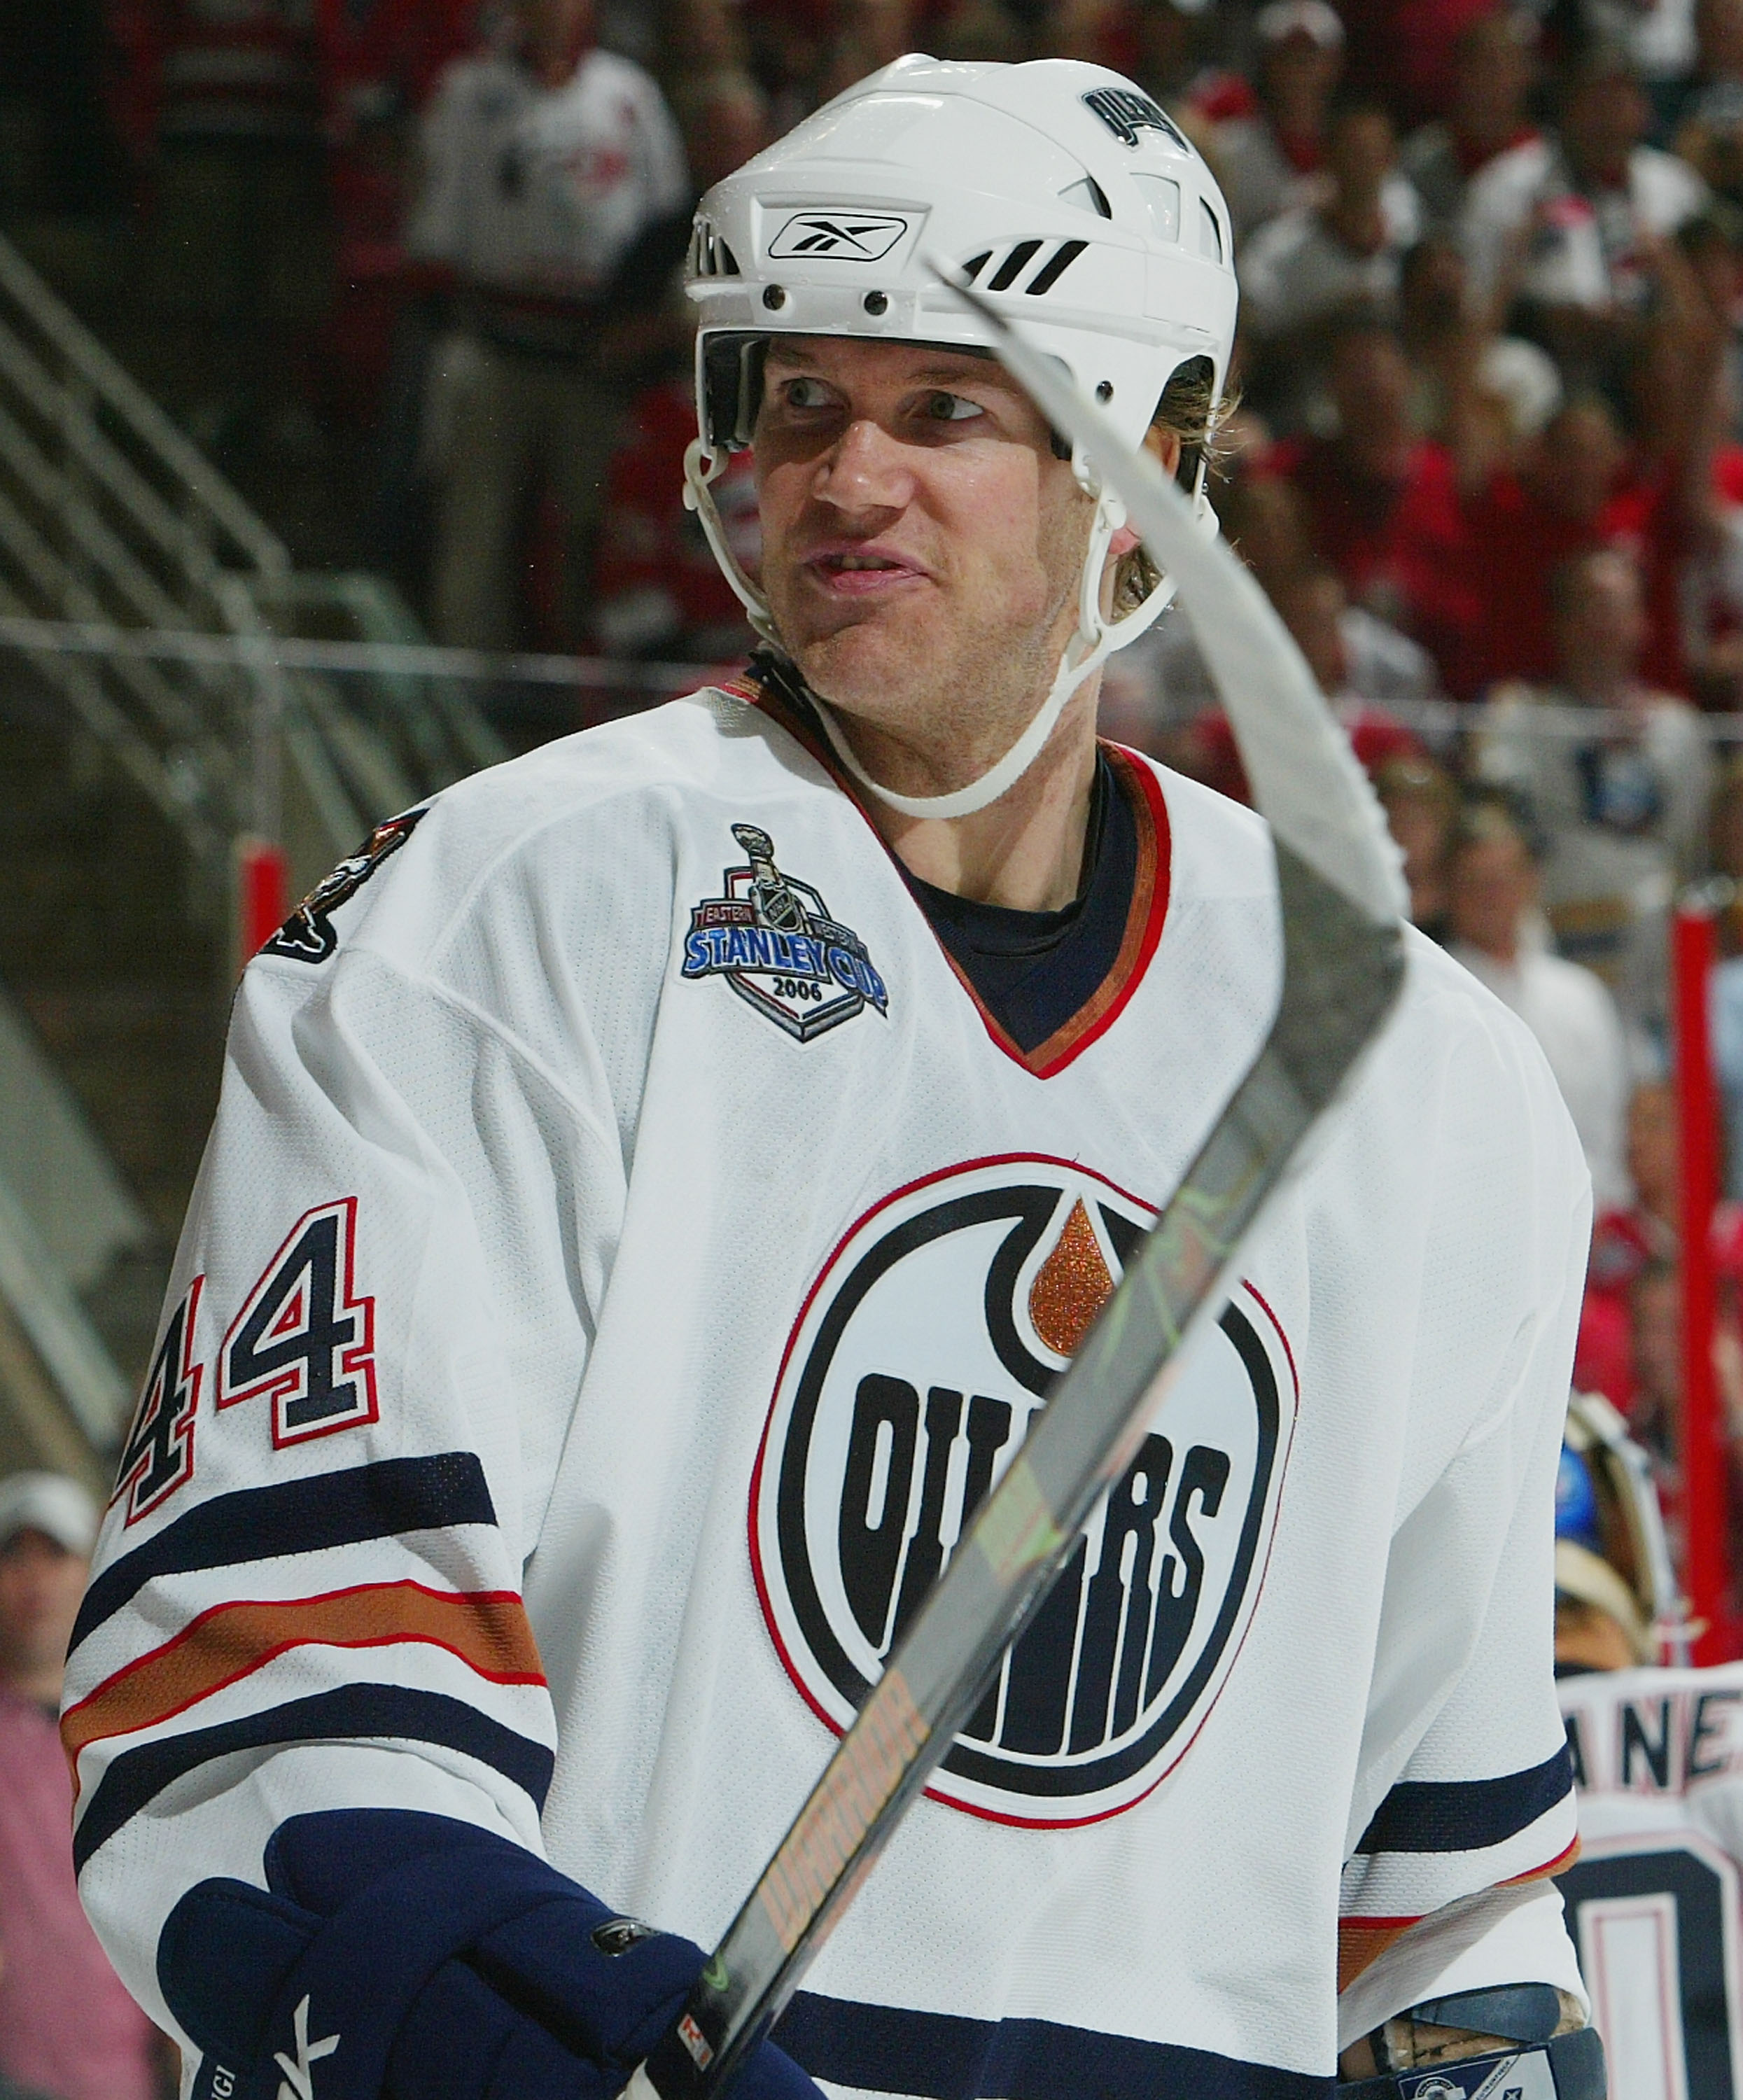 RALEIGH, NC - JUNE 19: Chris Pronger #44 of the Edmonton Oilers loks on against the Carolina Hurricanes during game seven of the 2006 NHL Stanley Cup Finals on June 19, 2006 at the RBC Center in Raleigh, North Carolina.The Hurricanes defeated the Oilers 3